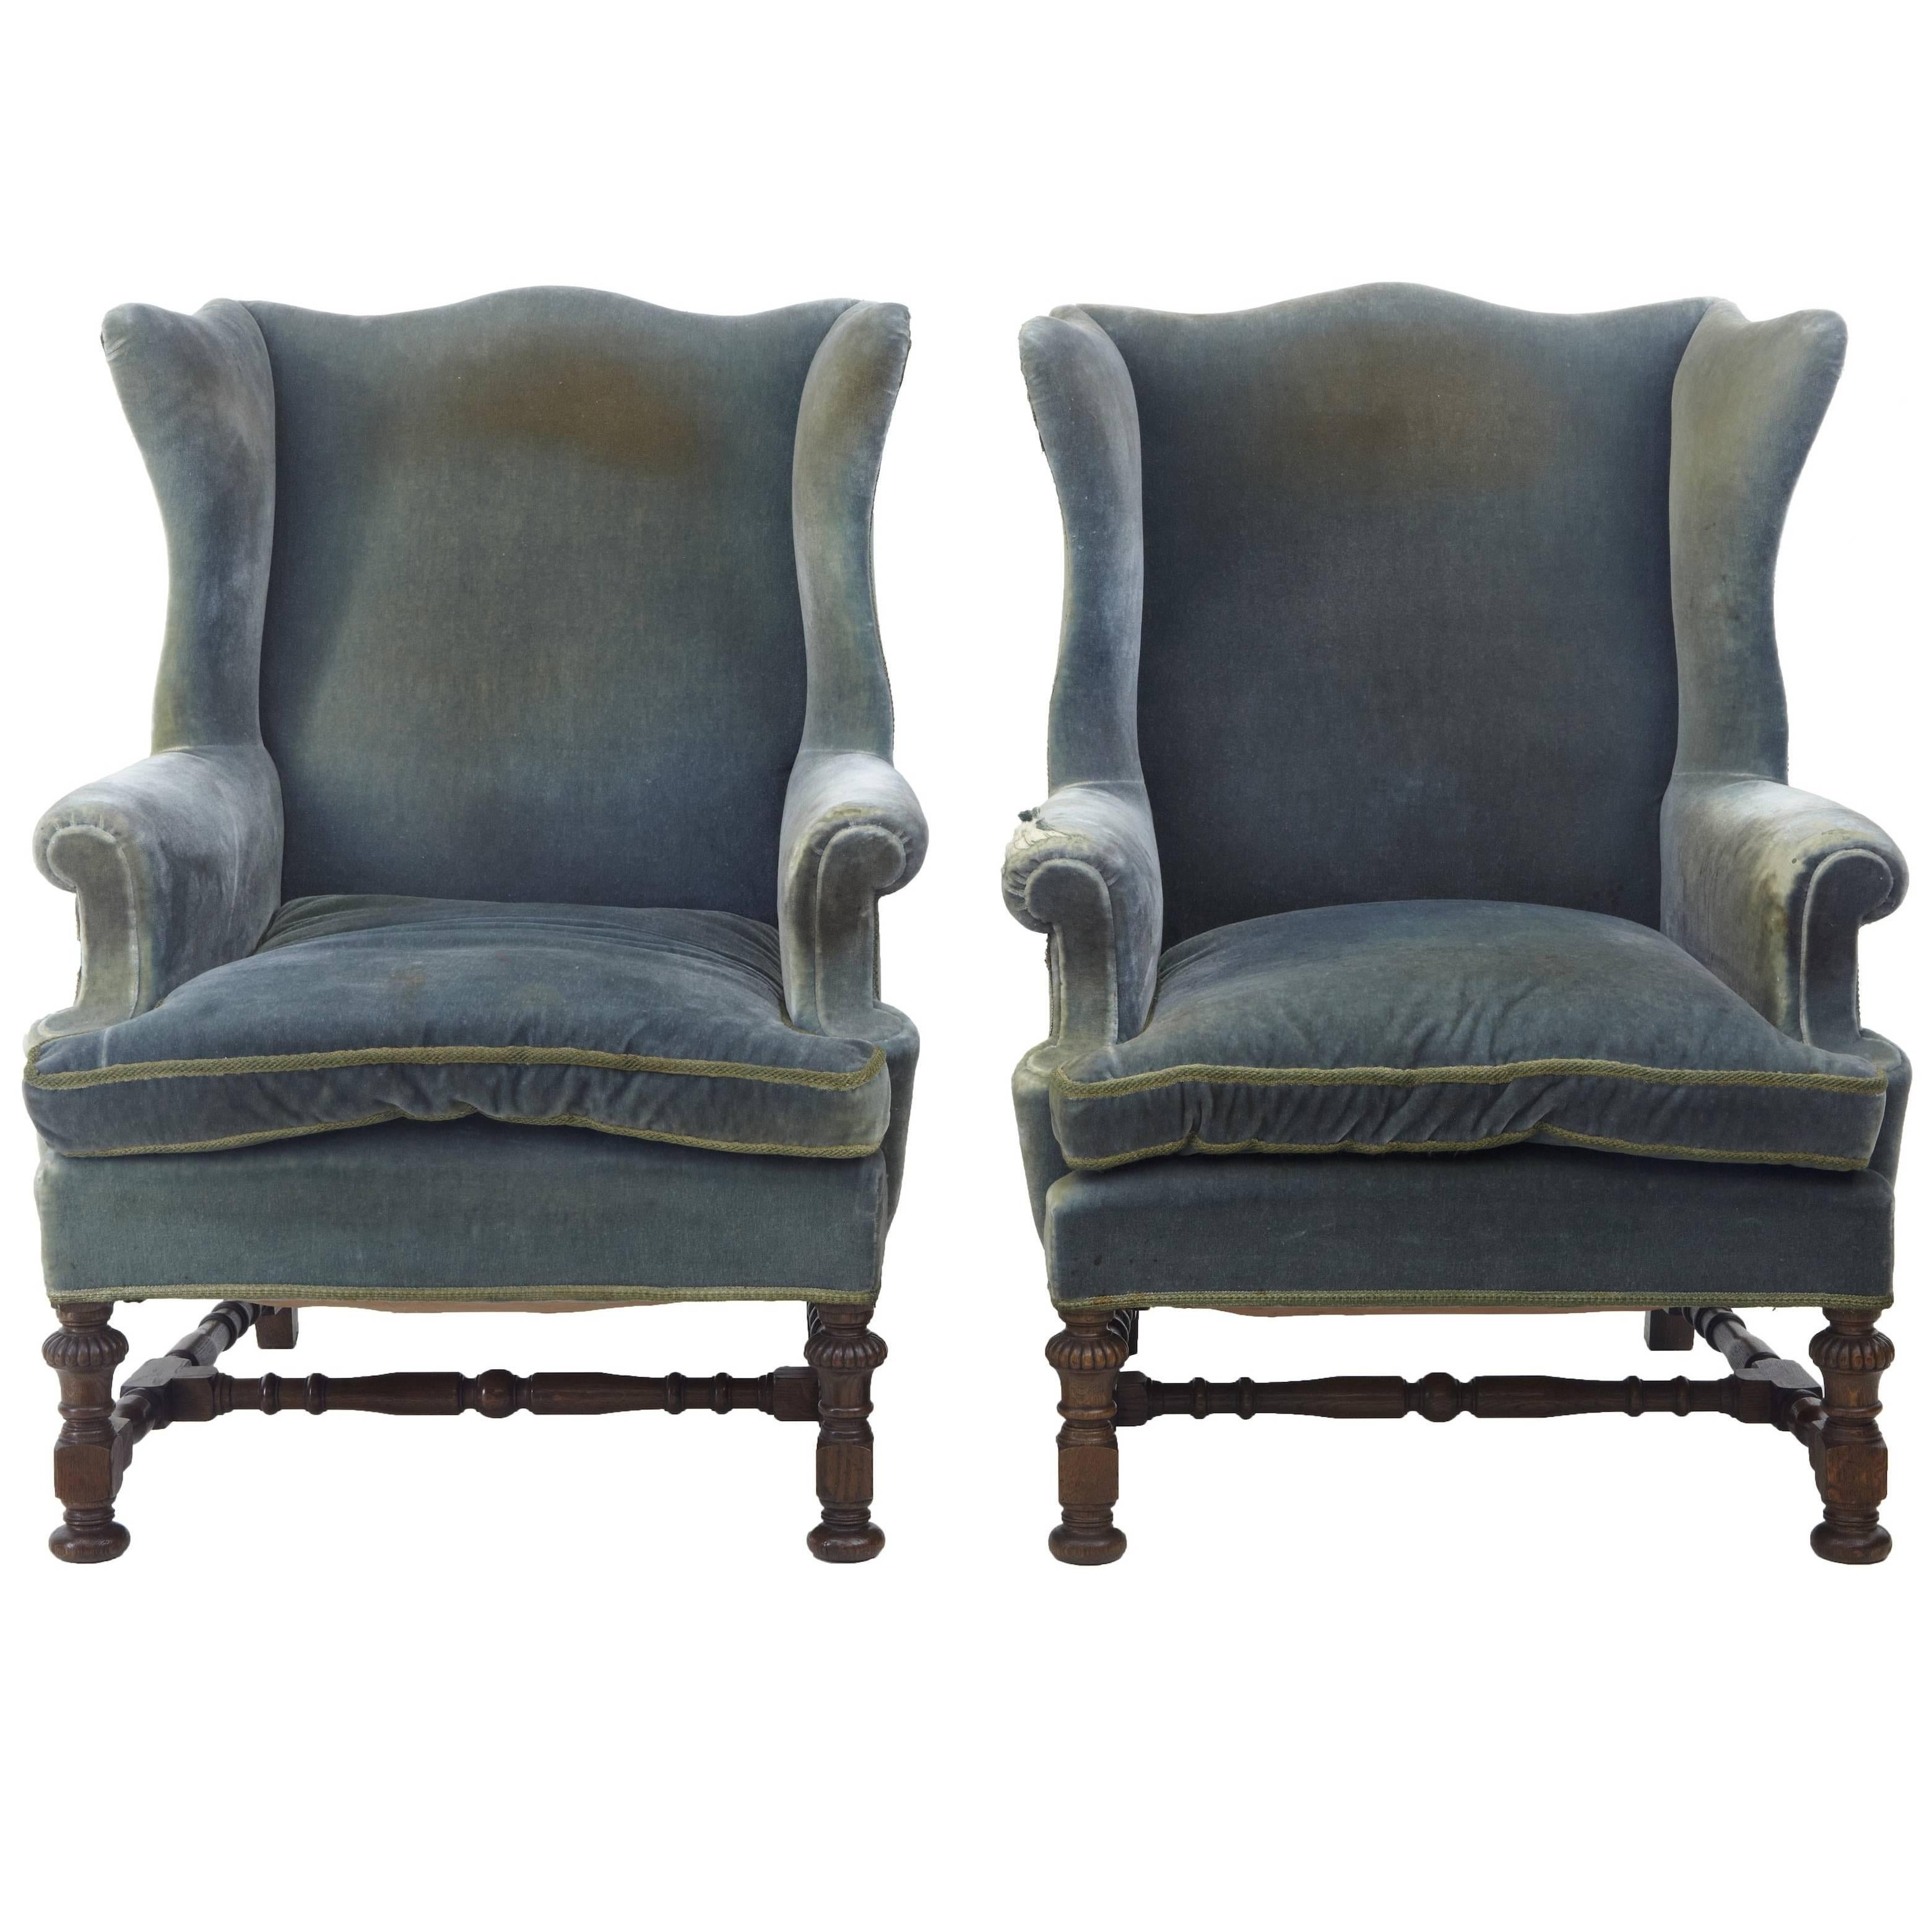 Pair of 19th century Oak Frame Wing Back Armchairs